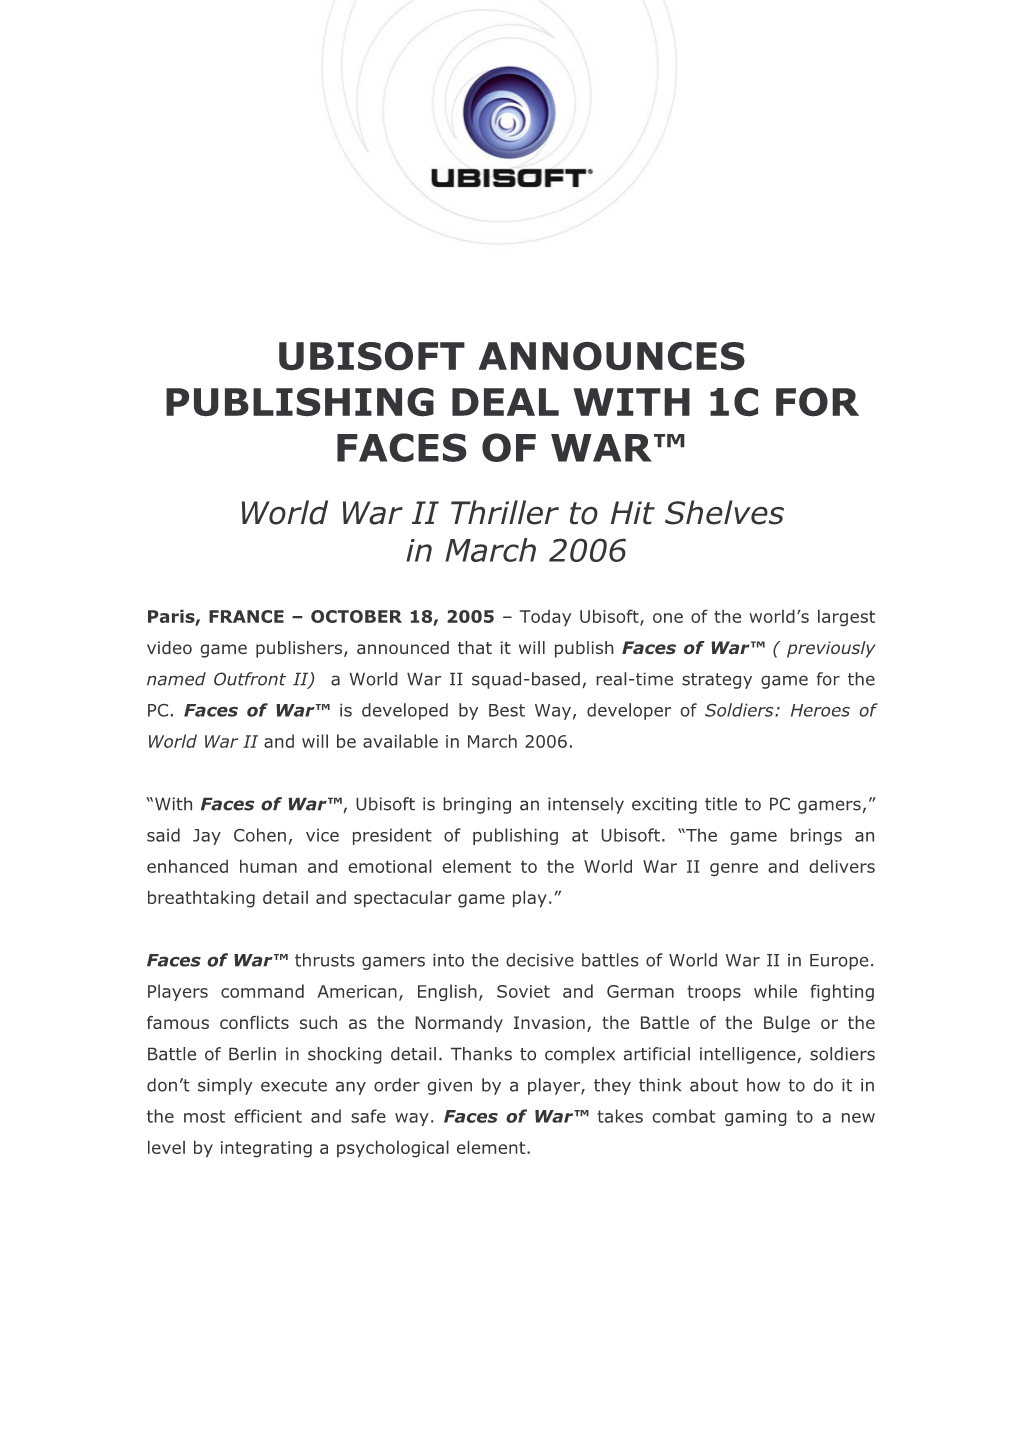 Ubisoft Announces Publishing Deal with 1C for Faces of War™